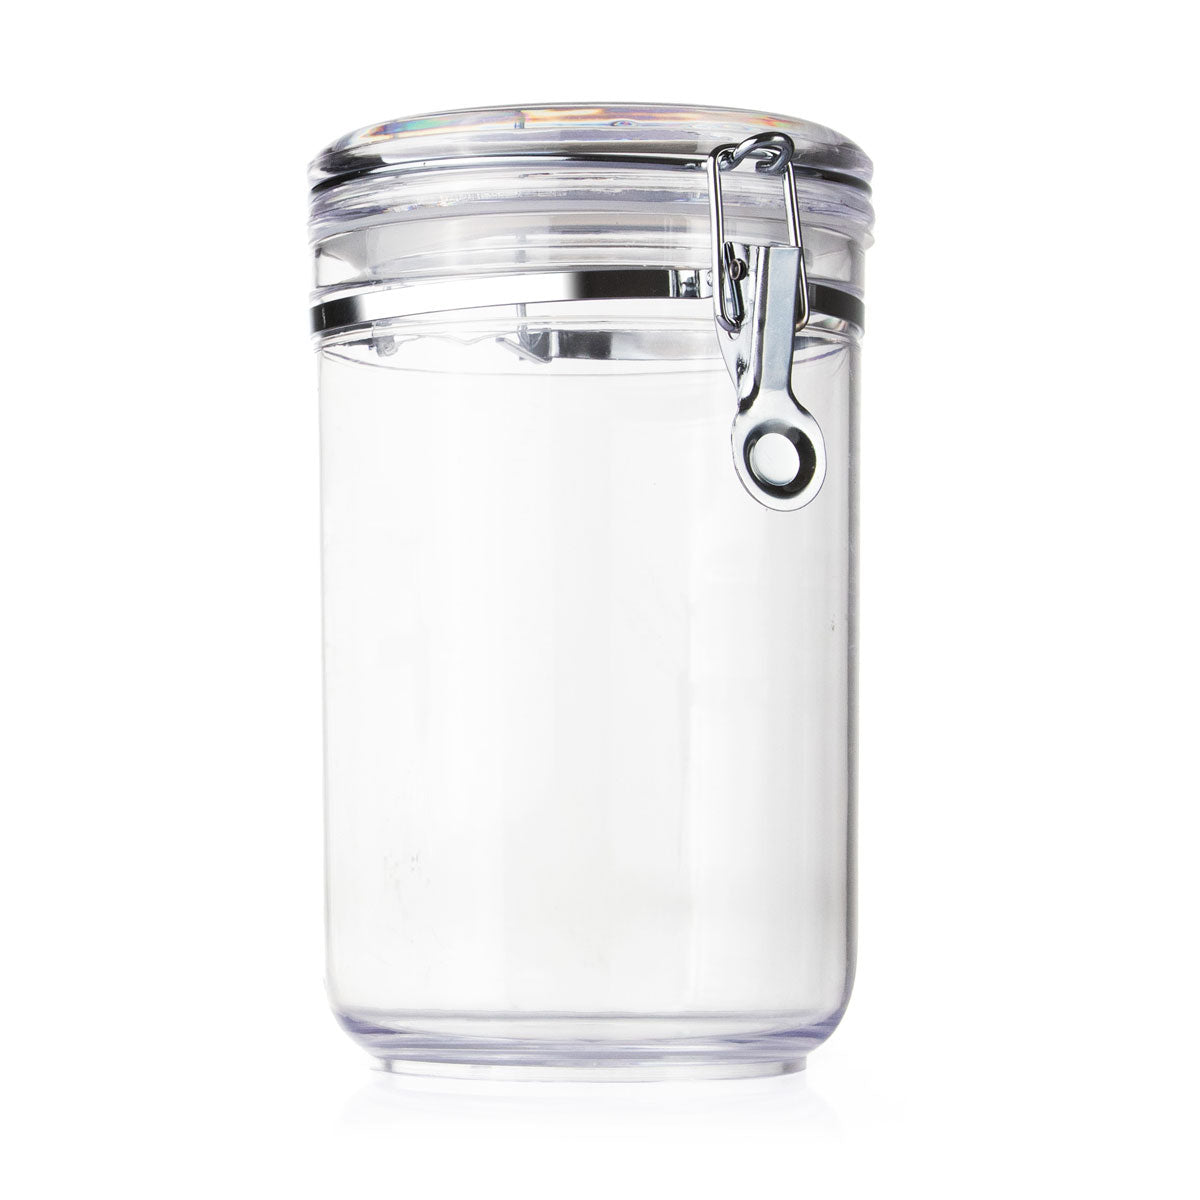 Large Canister For Laundry